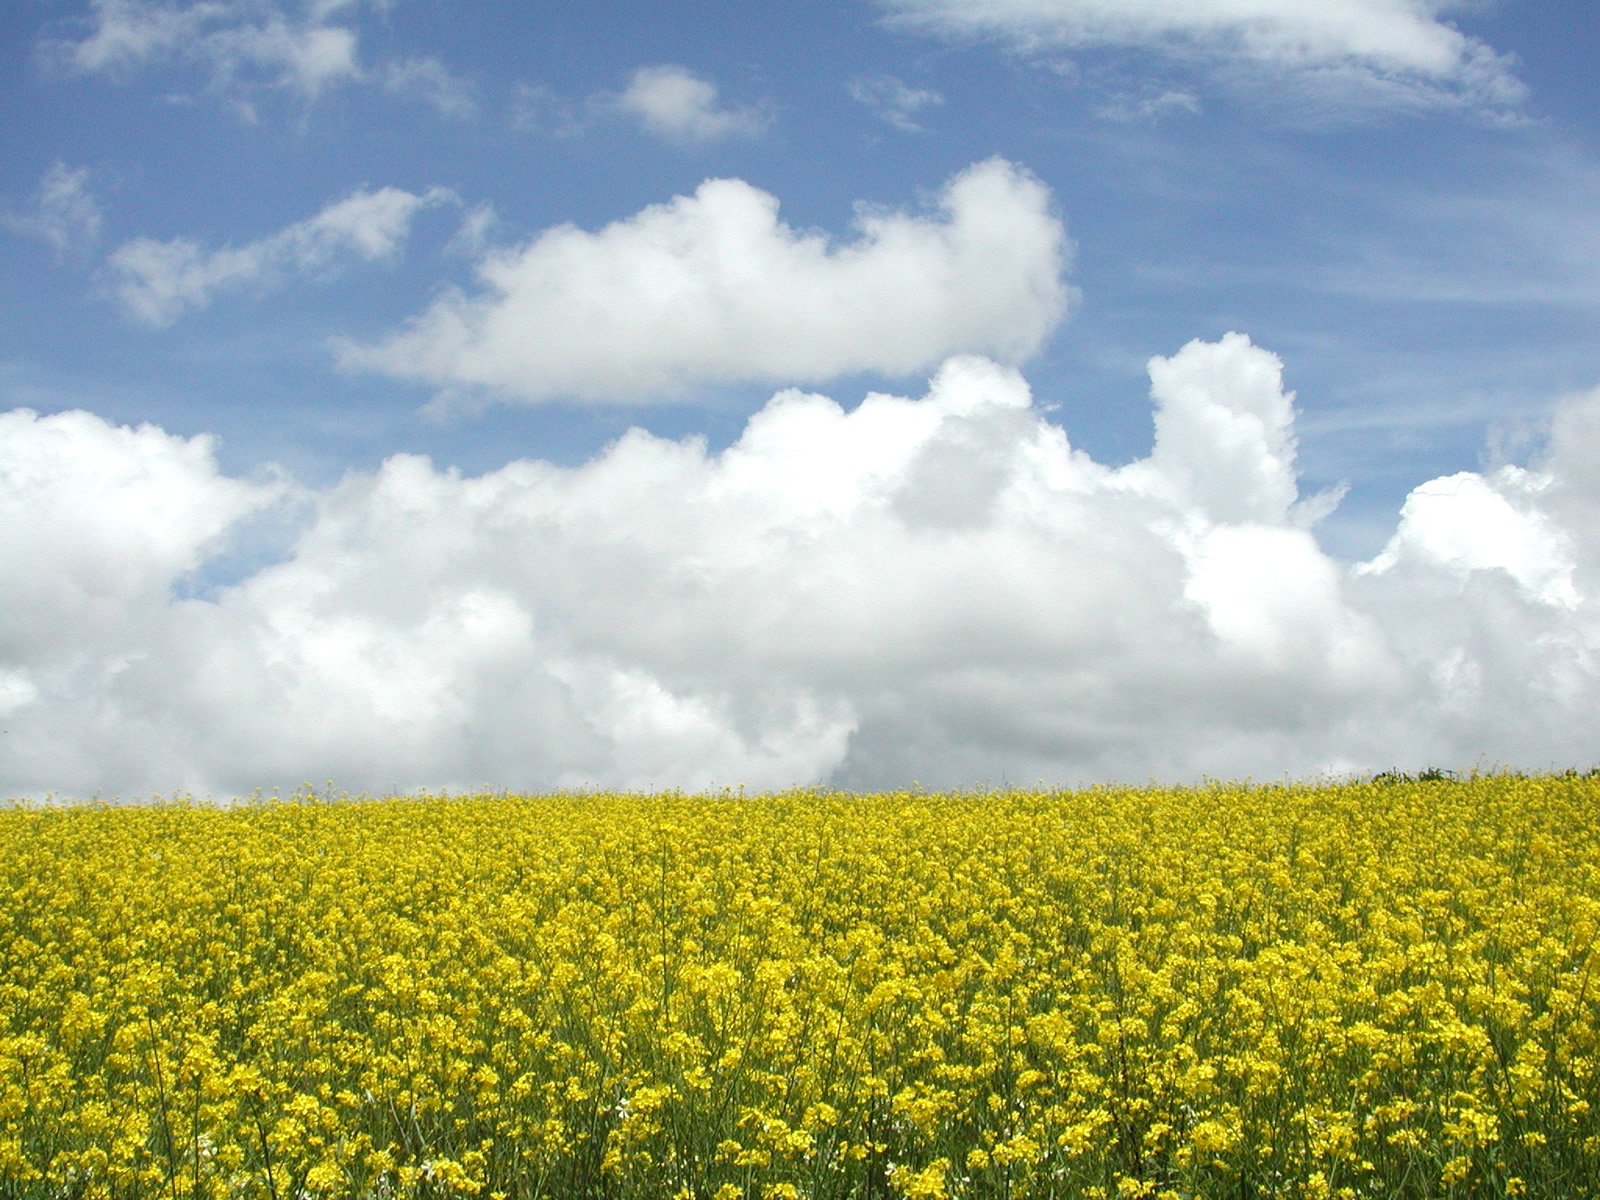 a large field full of yellow flowers under some clouds